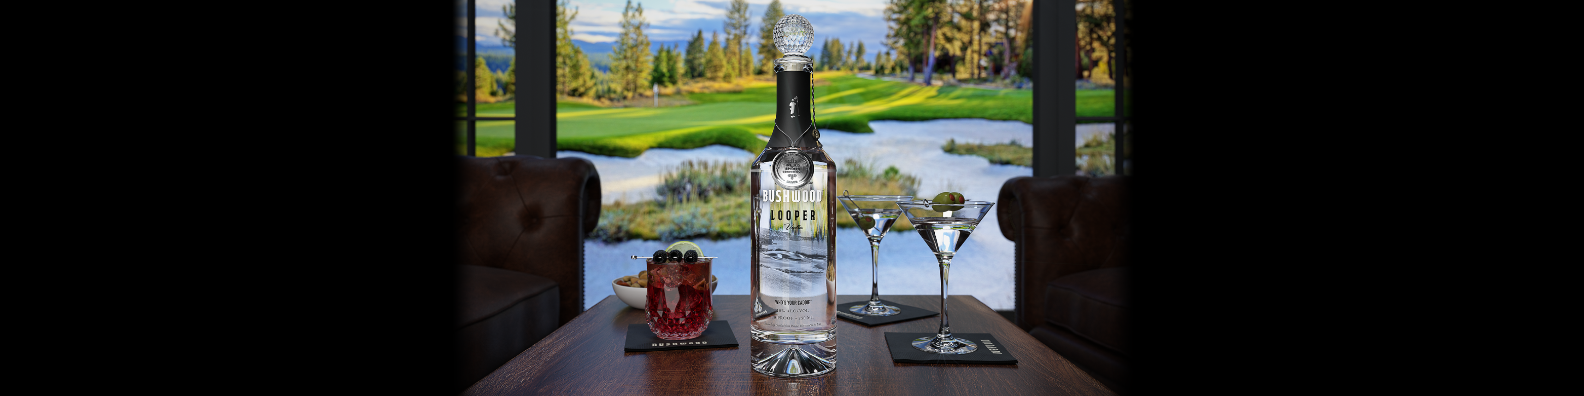 Bushwood: LOOPER, HAND-CRAFTED VODKA - Who's Your Caddie®